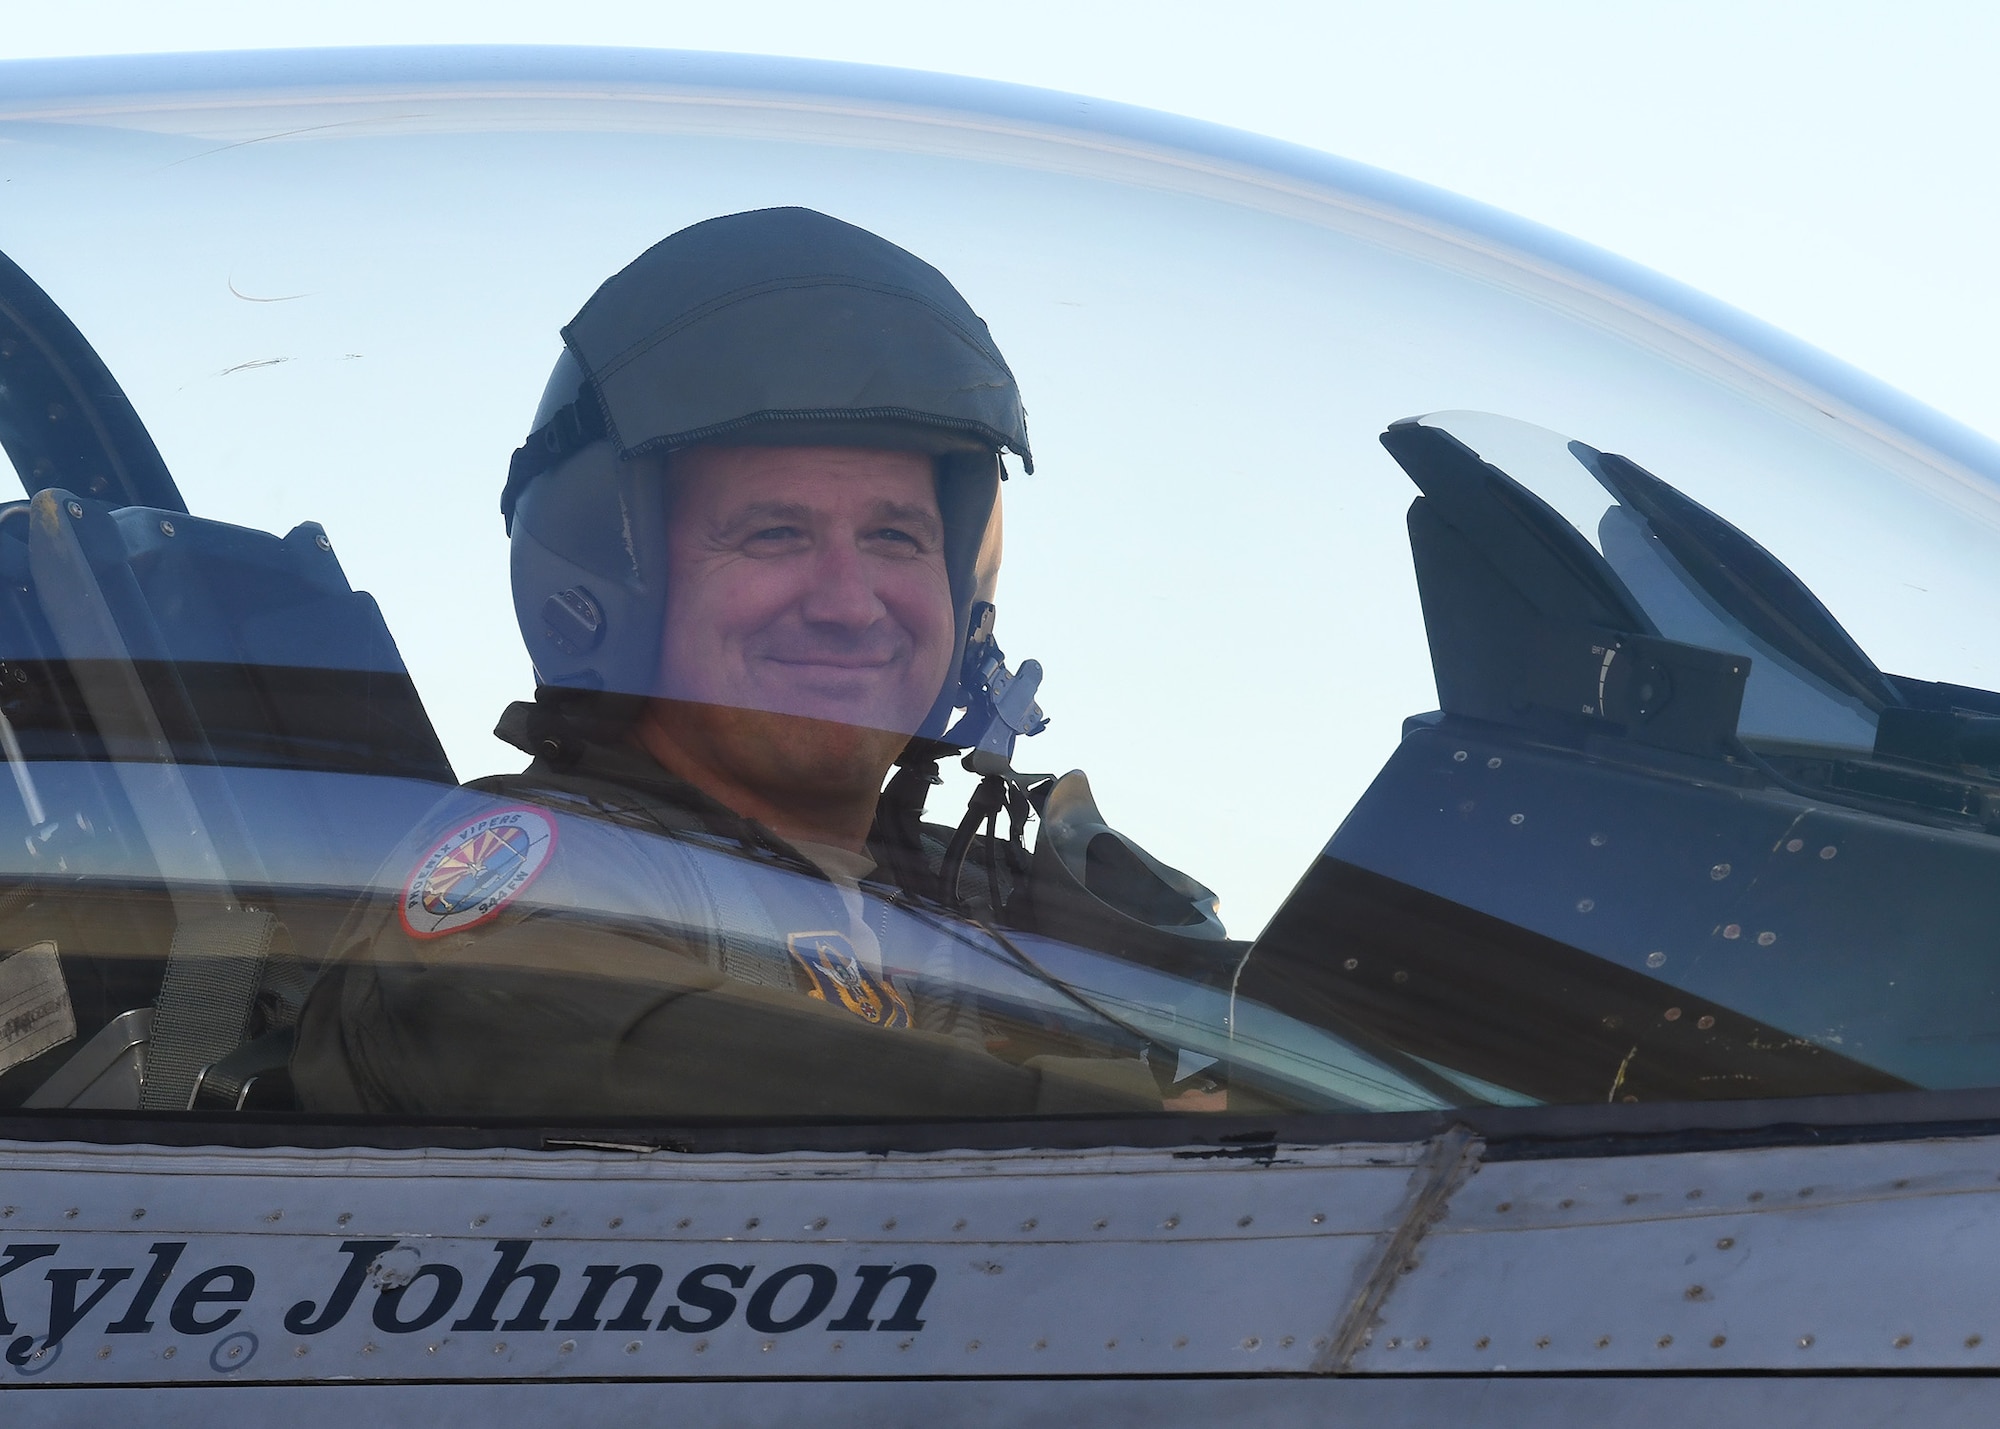 Col. Sean Rassas, 944th Fighter Wing vice commander, smiles from the cockpit of an F-16 Fighting Falcon after completing a milestone sortie Nov. 24, 2020, at Luke Air Force Base, Ariz.  This flight pushed Rassas passed three thousand flying hours in the F-16, making him one of only 296 U.S. Air Force pilots to reach that unique milestone.